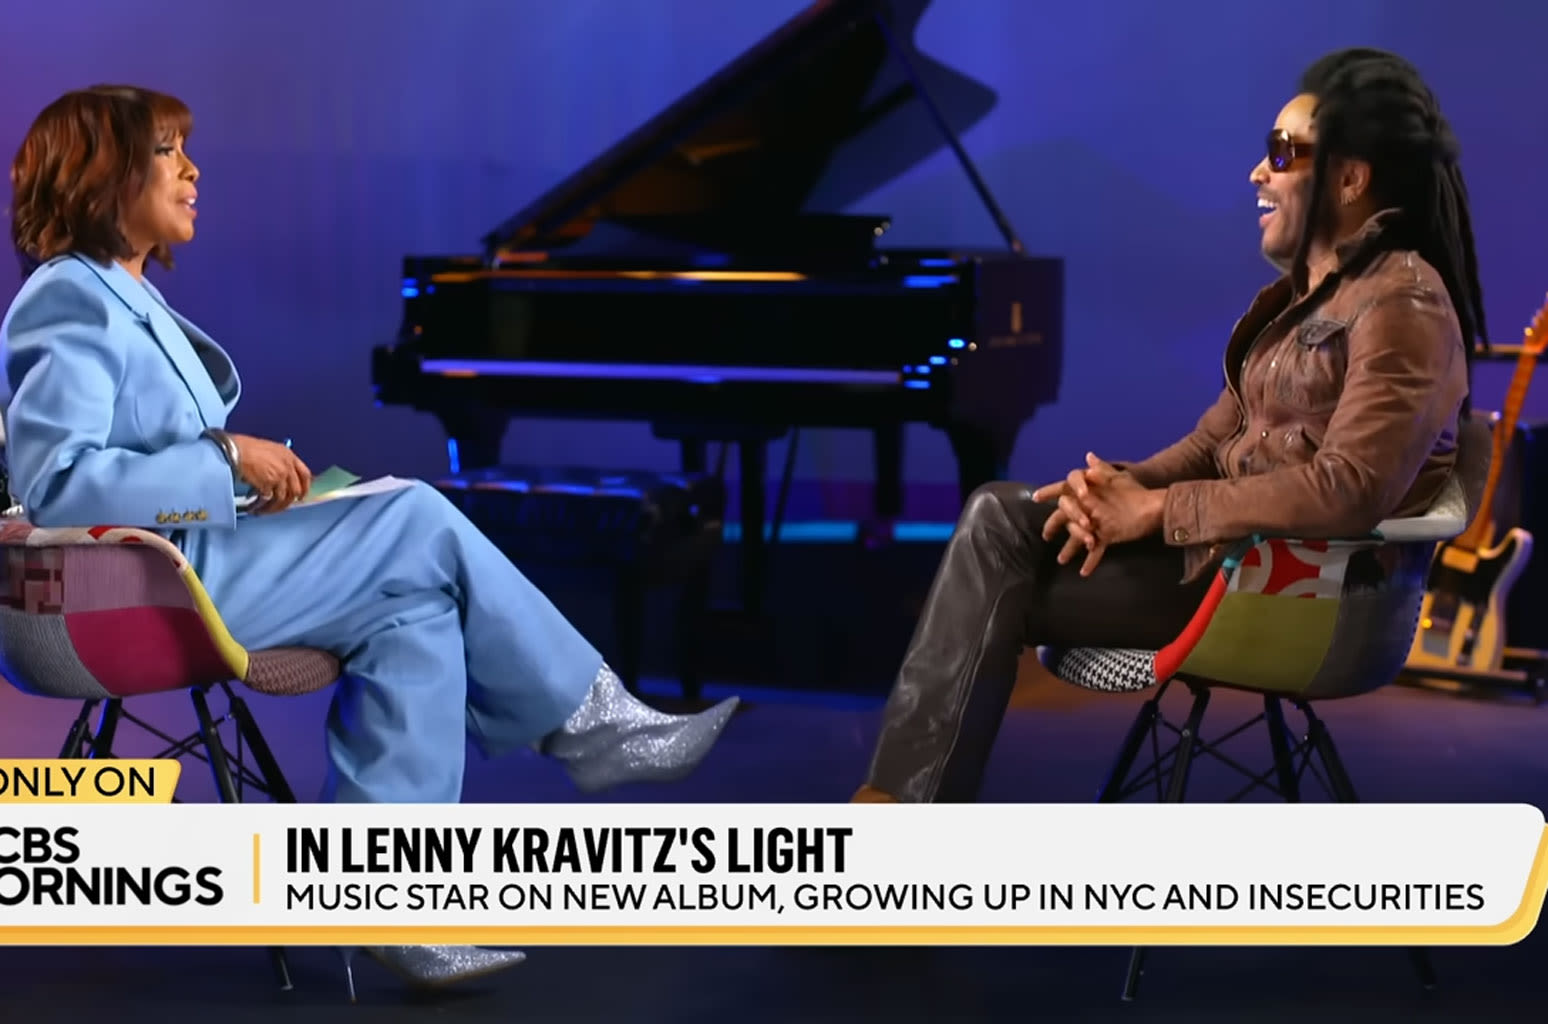 Gayle King Shoots Her Shot at Lenny Kravitz in Viral Interview Moment